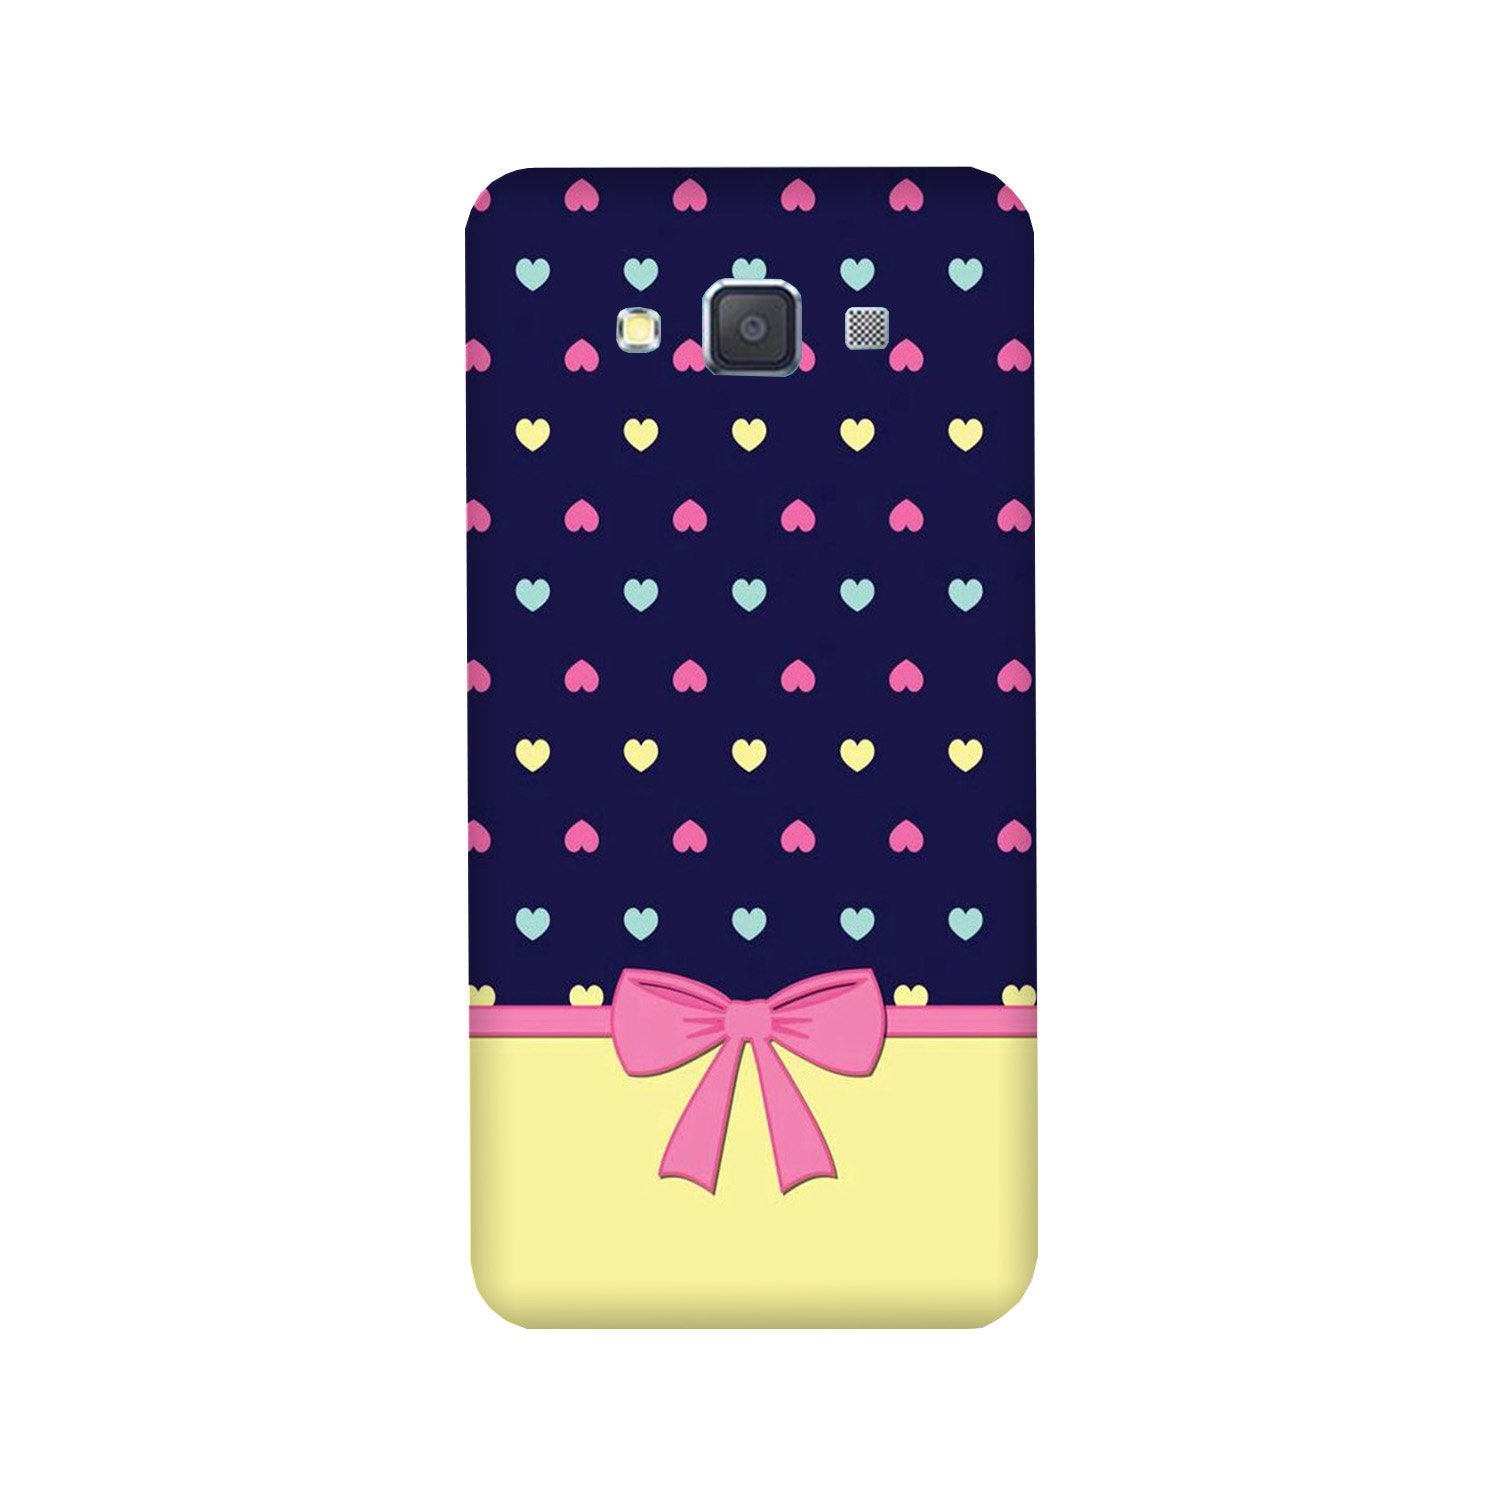 Gift Wrap5 Case for Galaxy J7 (2016)